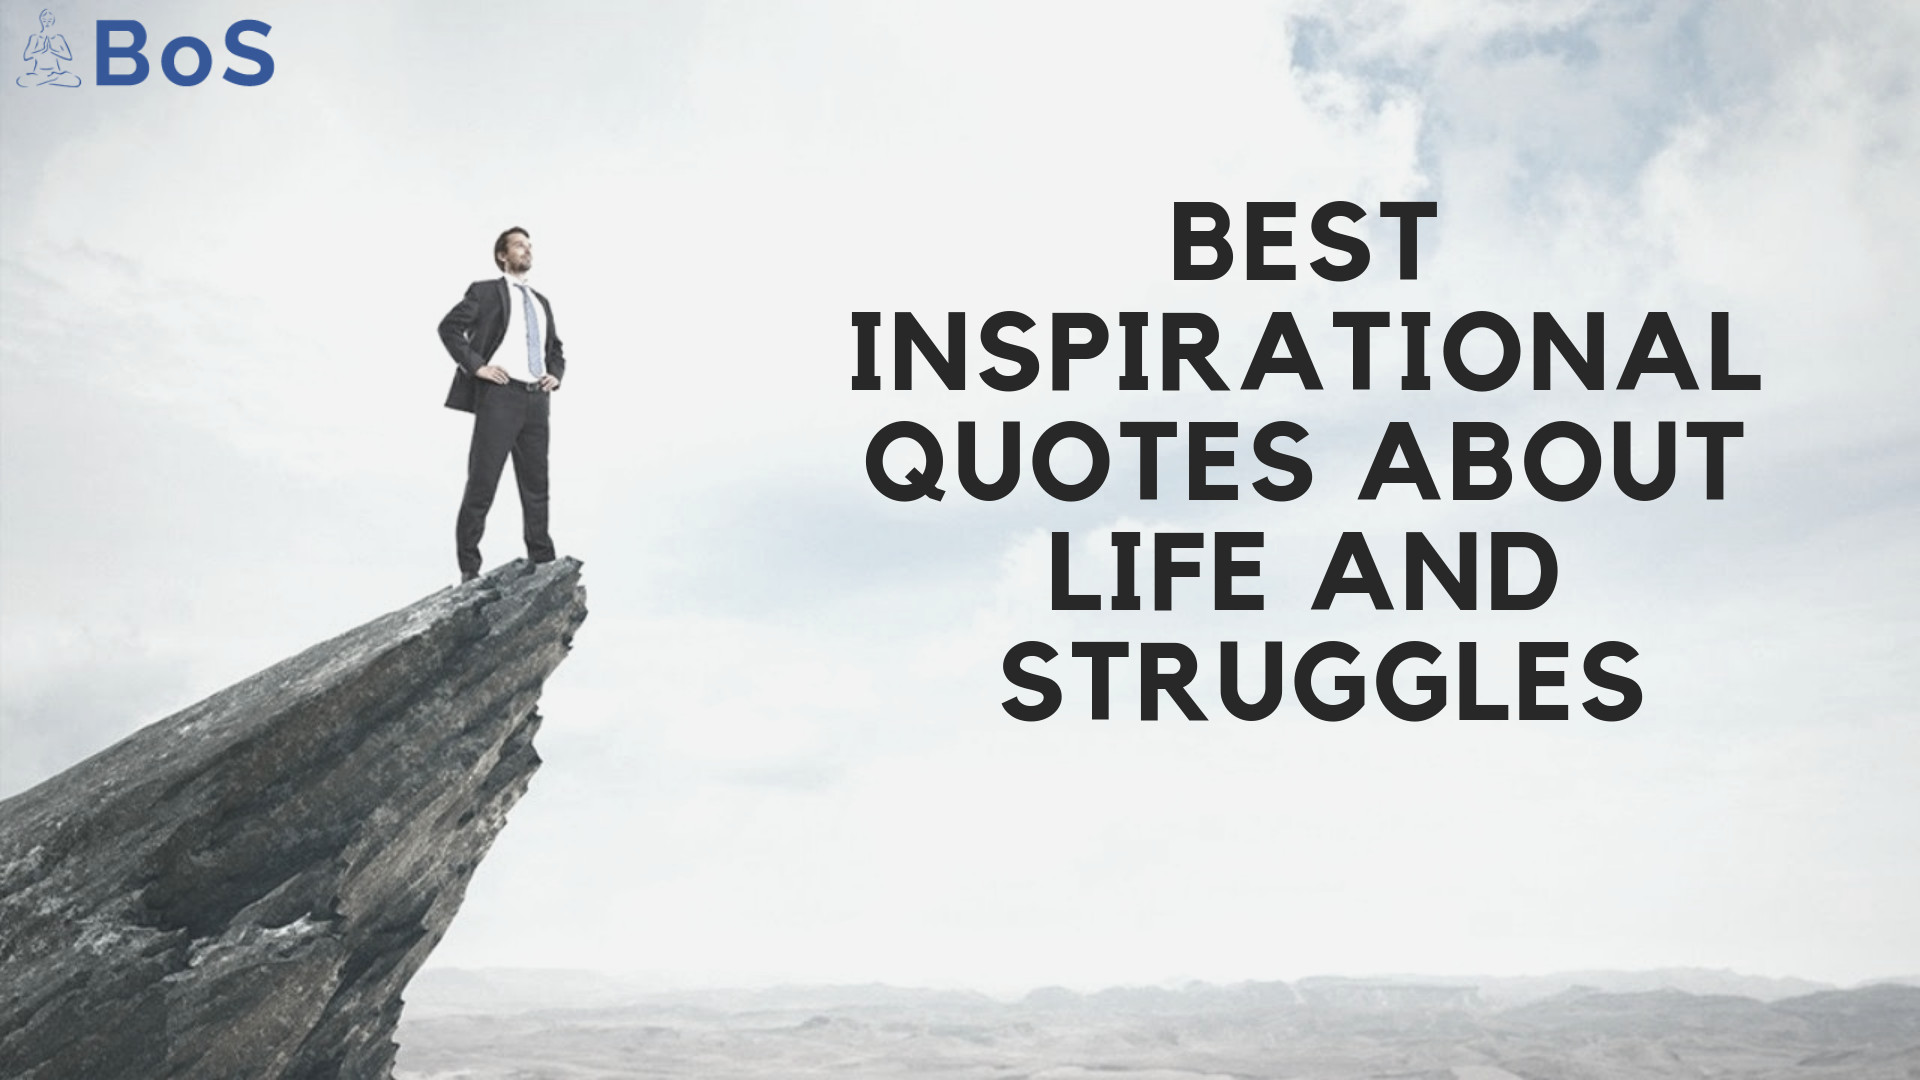 Best Inspirational Quotes About Life
 20 Best Inspirational Quotes About Life And Struggles